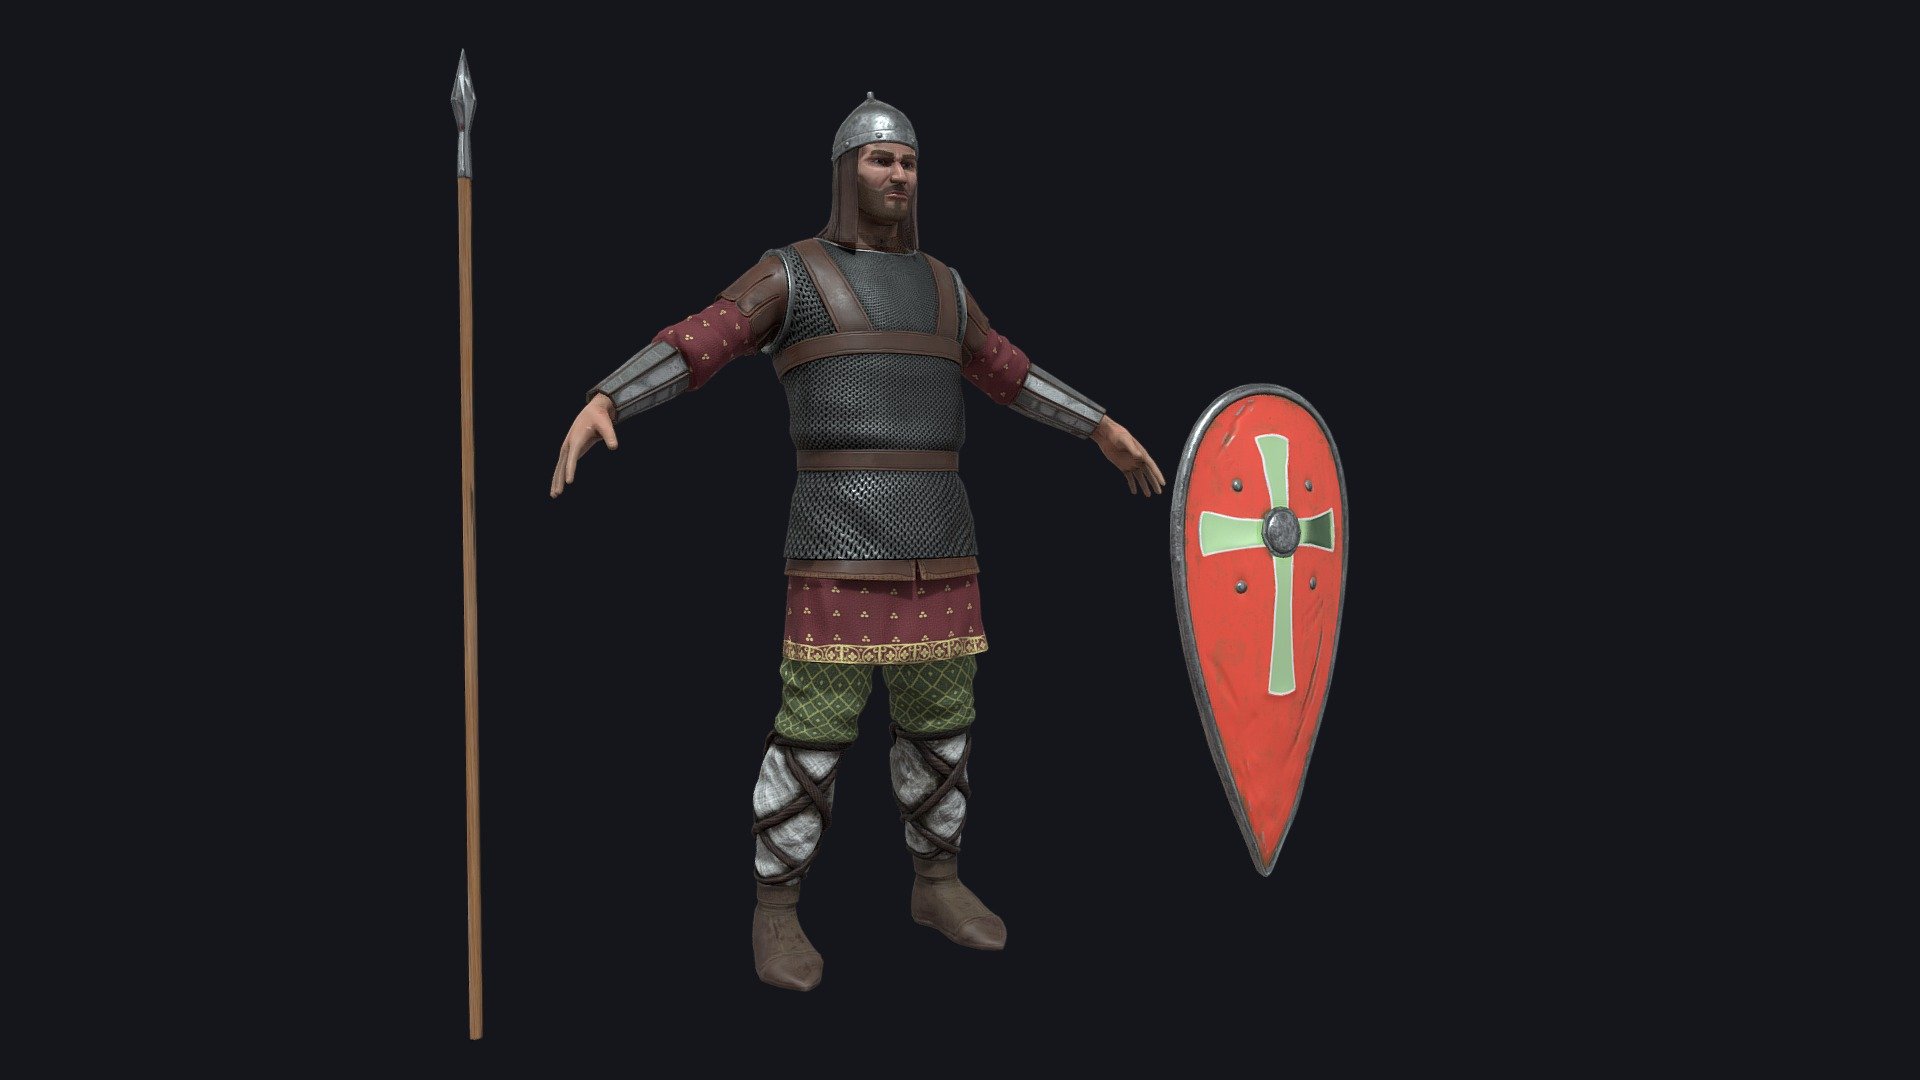 a low-poly knight. 22547 polygons 3d model